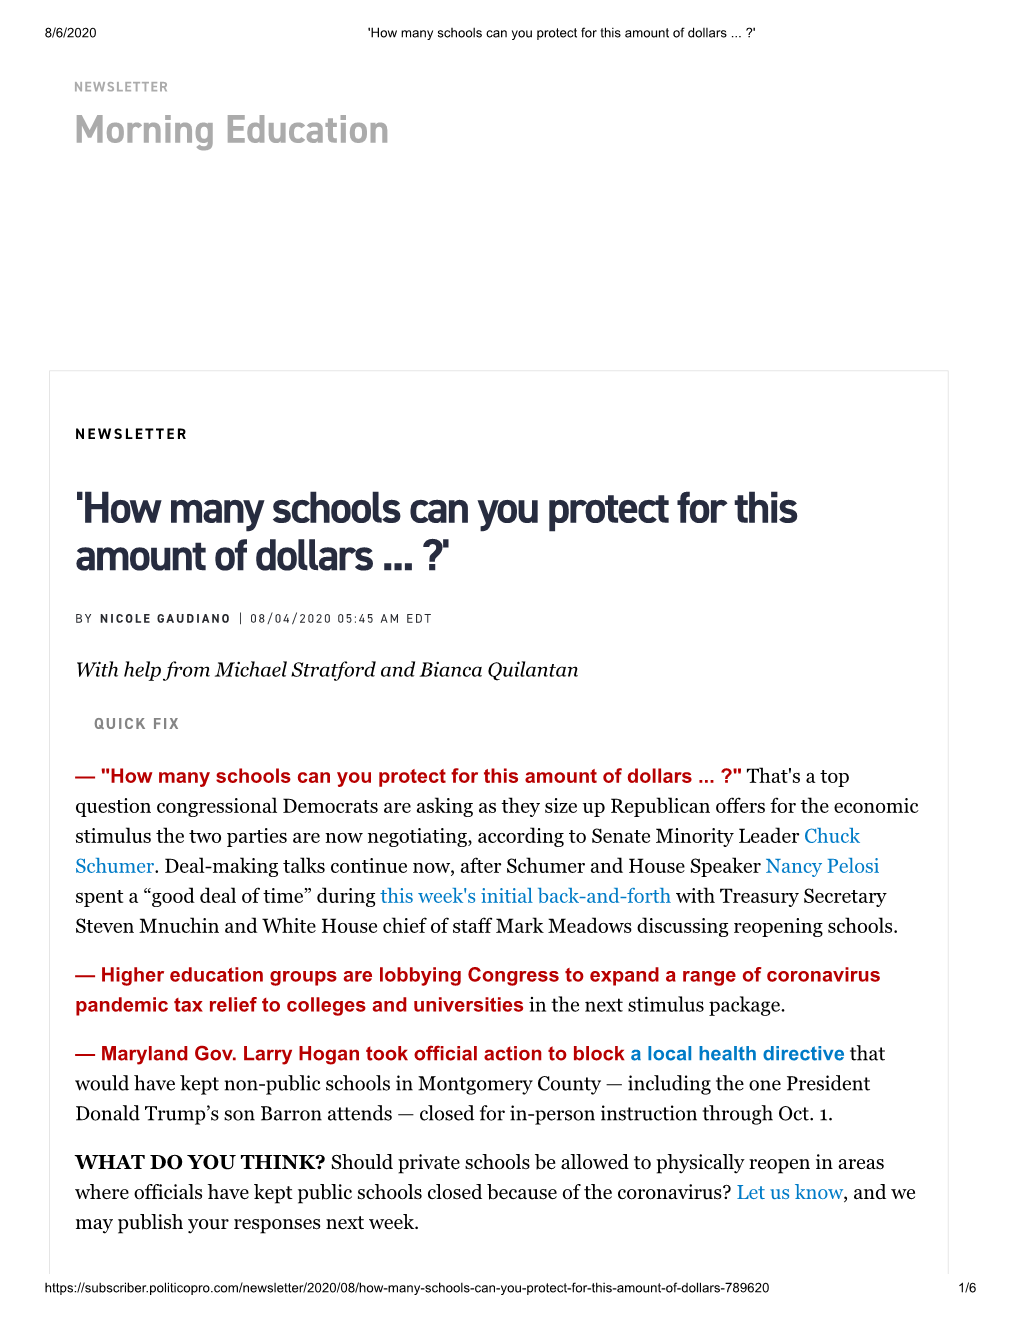 'How Many Schools Can You Protect for This Amount of Dollars ... ?'